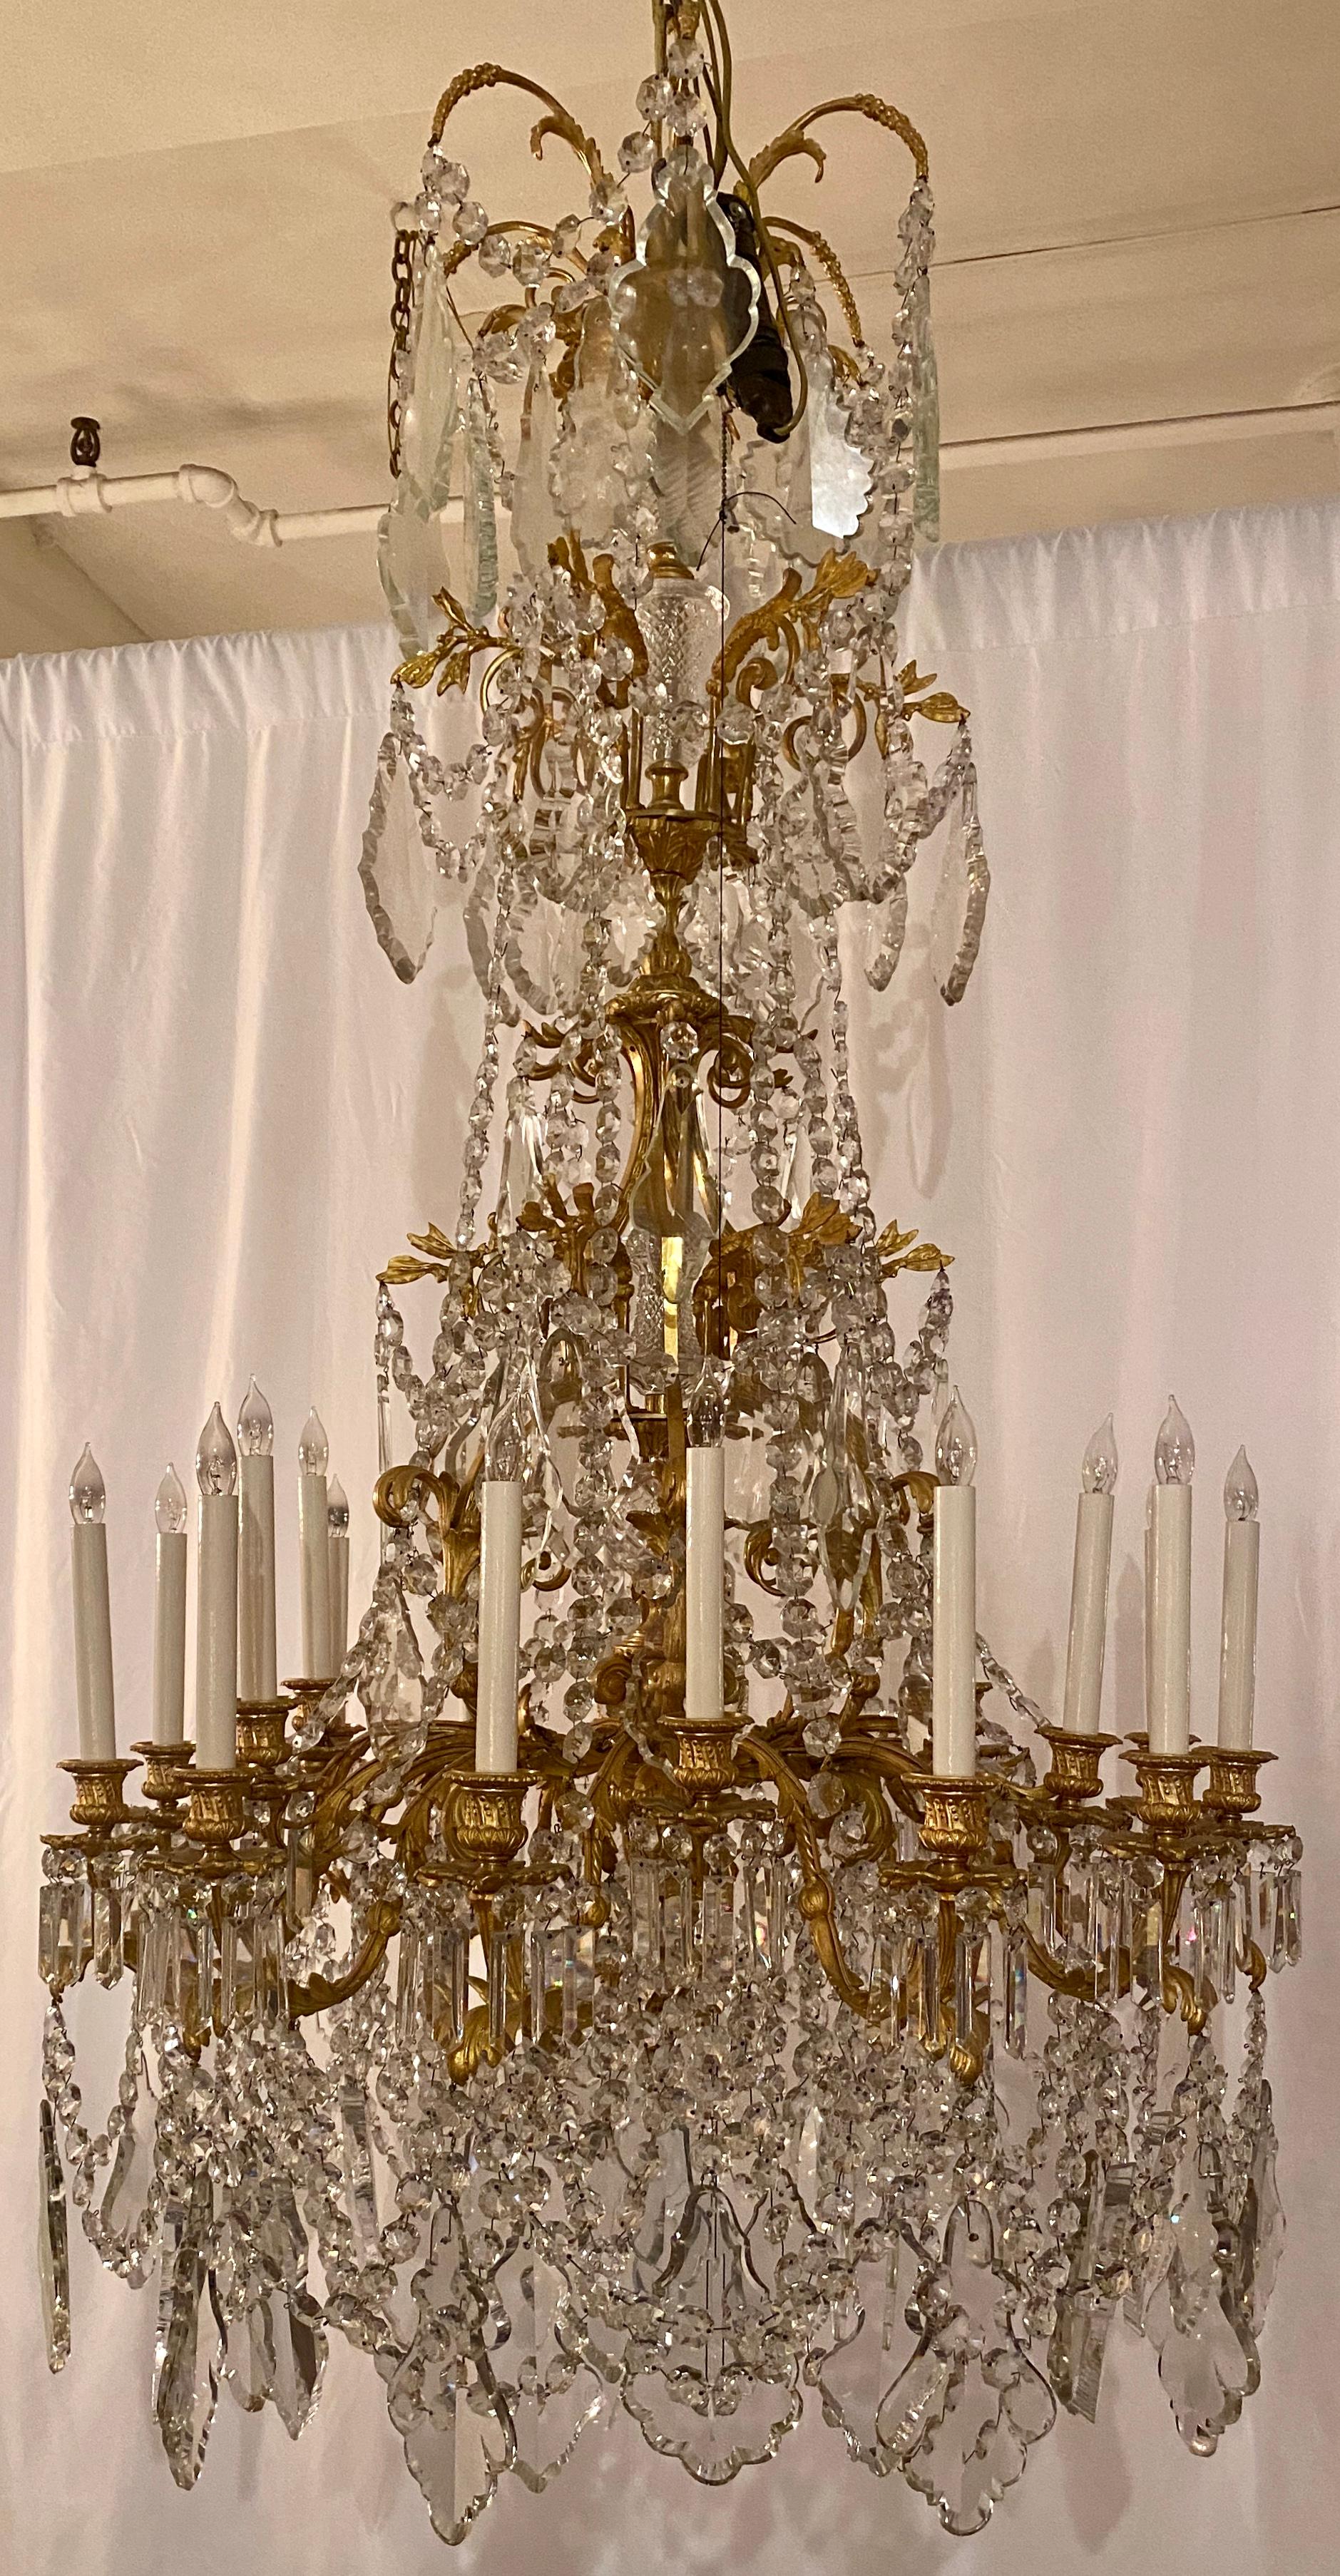 Antique French Napoleon III finest original baccarat crystal and gold bronze chandelier, circa 1865-1875.
Heavily draped in crystal beading and prisms.
